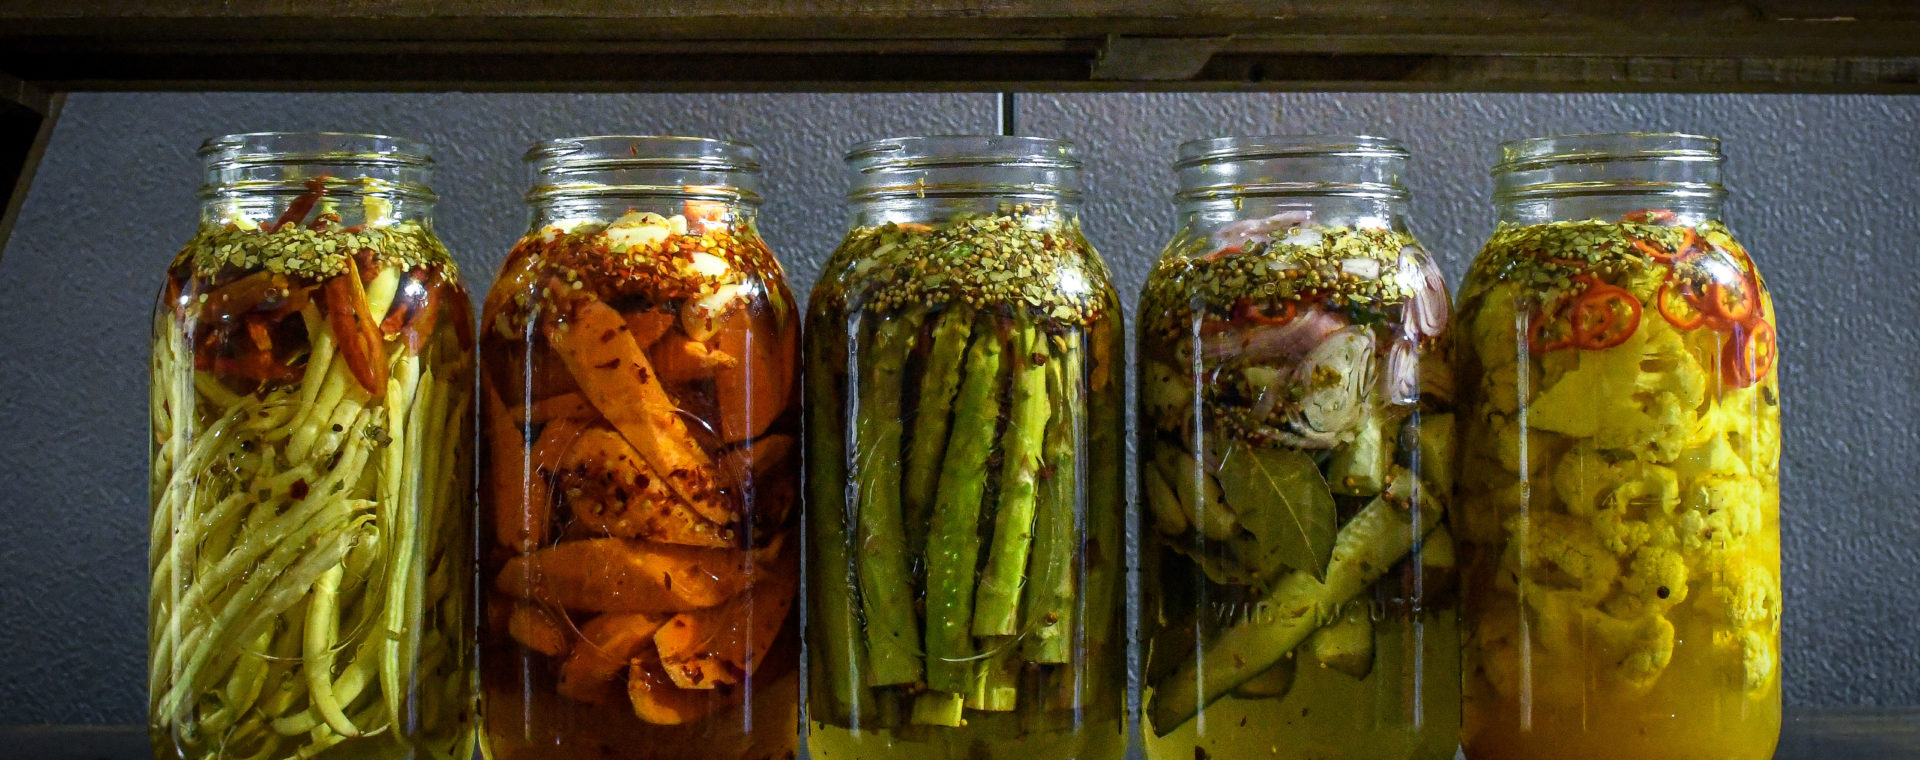 5 large mason jars with different pickled vegetables. From left to right, peppers, carrots, asparagus, cucumbers and cauliflower.